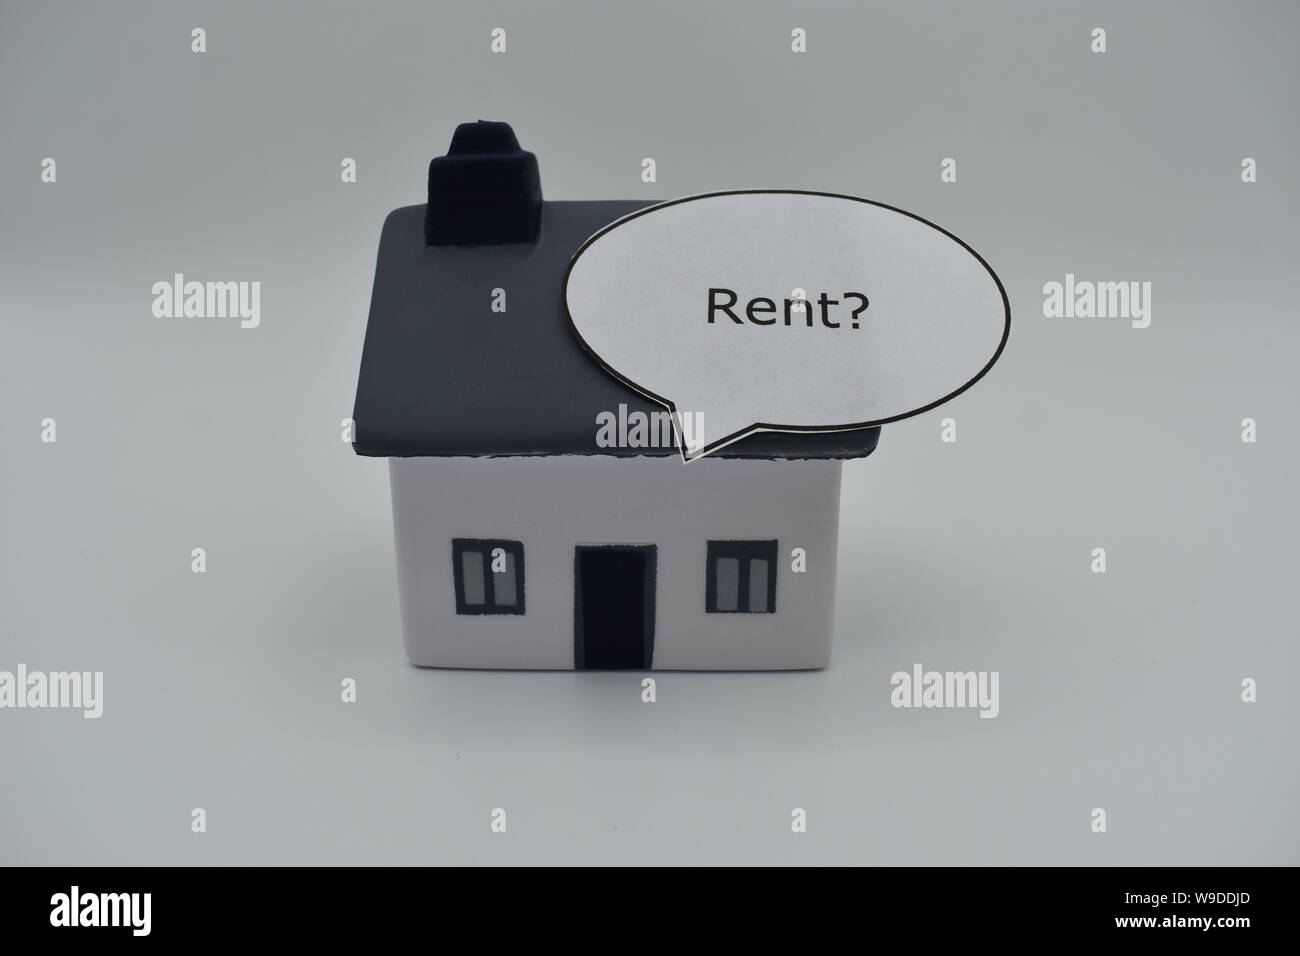 A model house with the word 'Rent?' in a speech bubble on the roof. Stock Photo